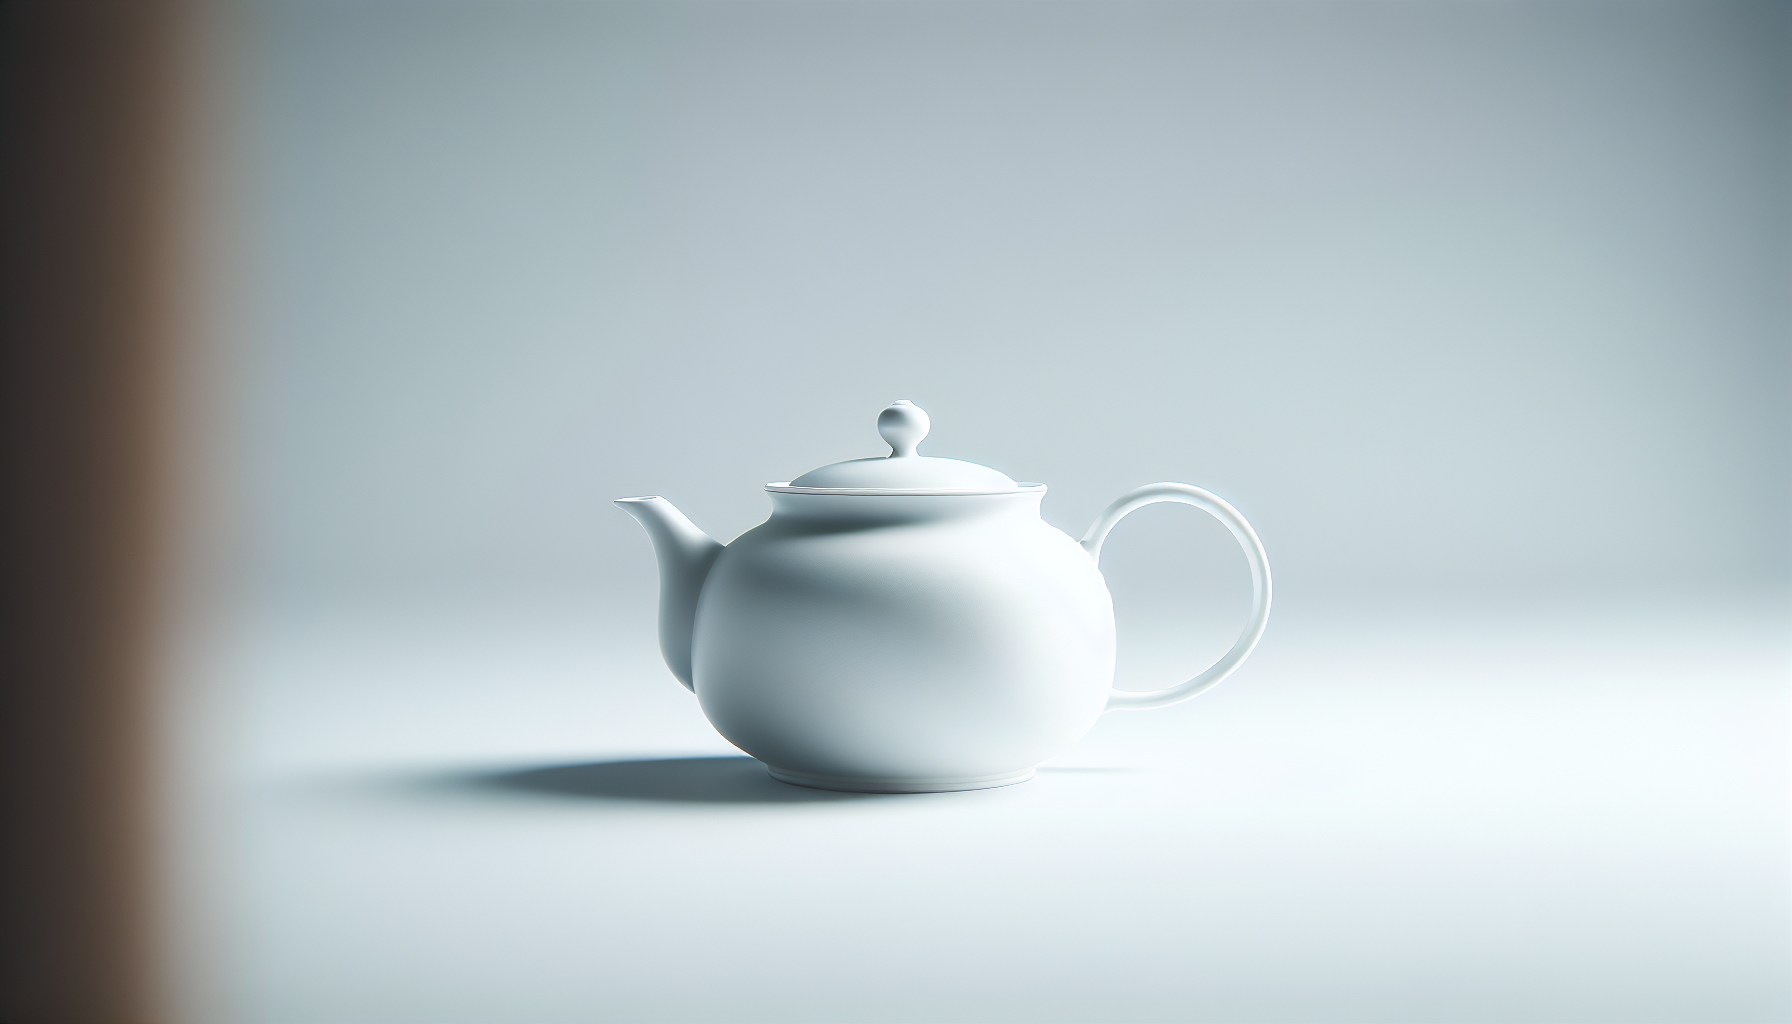 What Should I Look For In A Teapot?